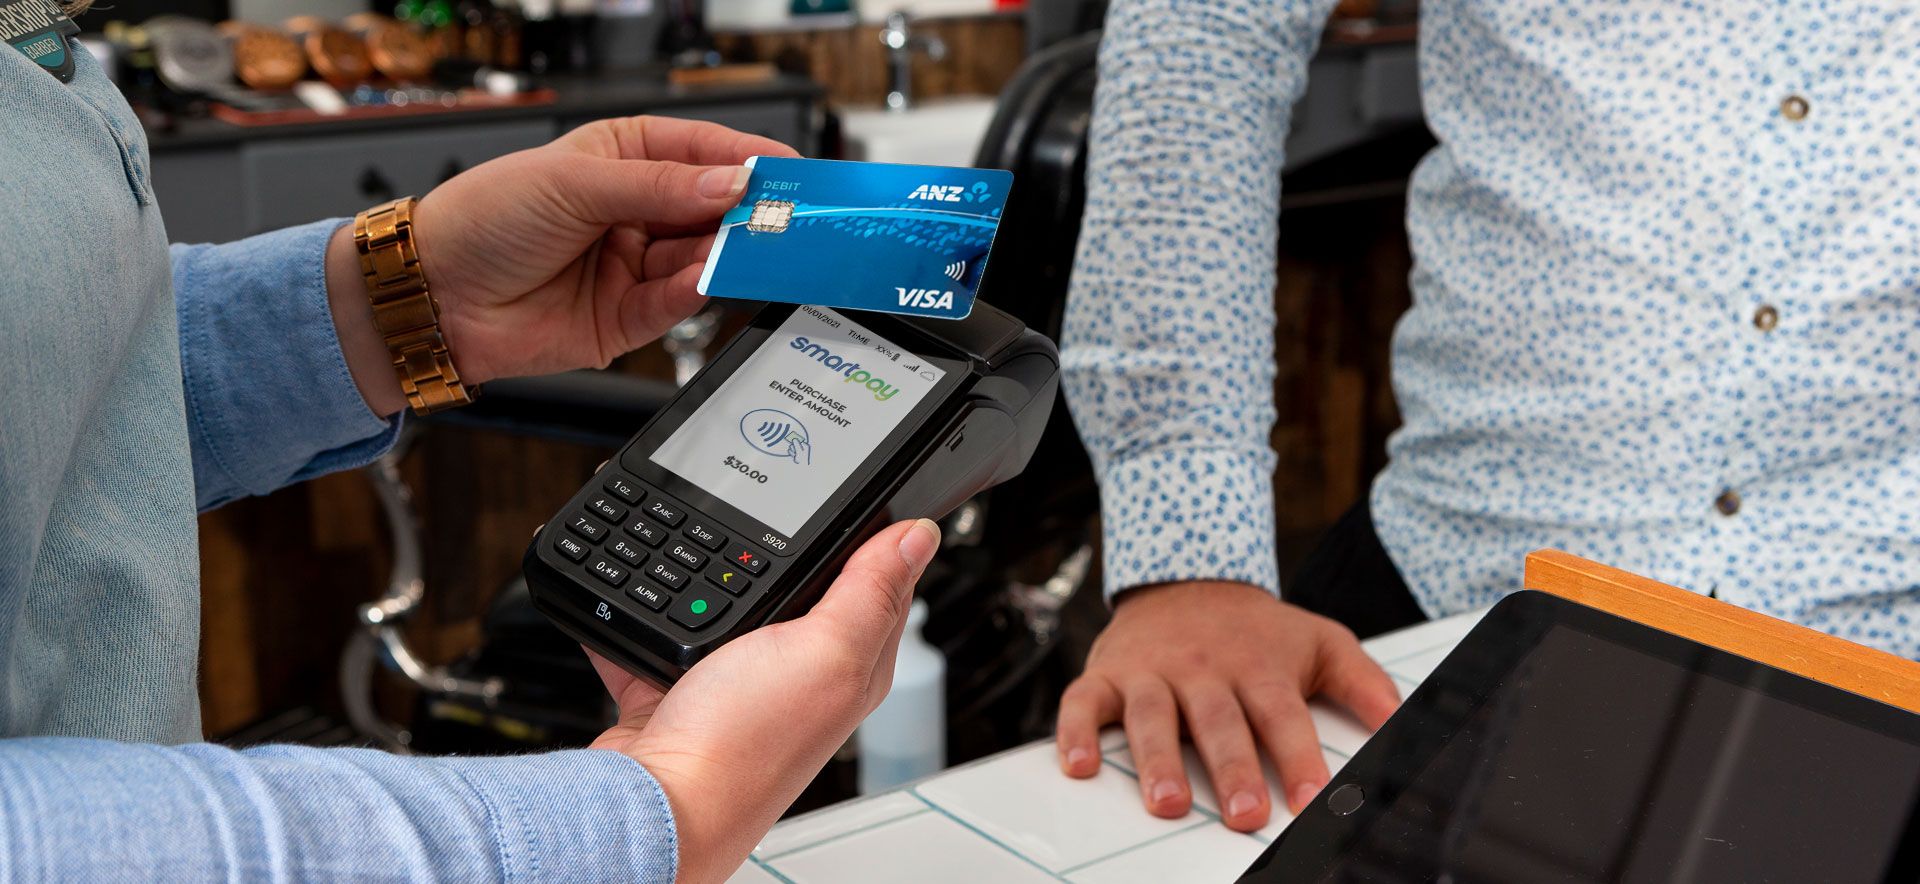 contactless card payment on EFTPOS machine